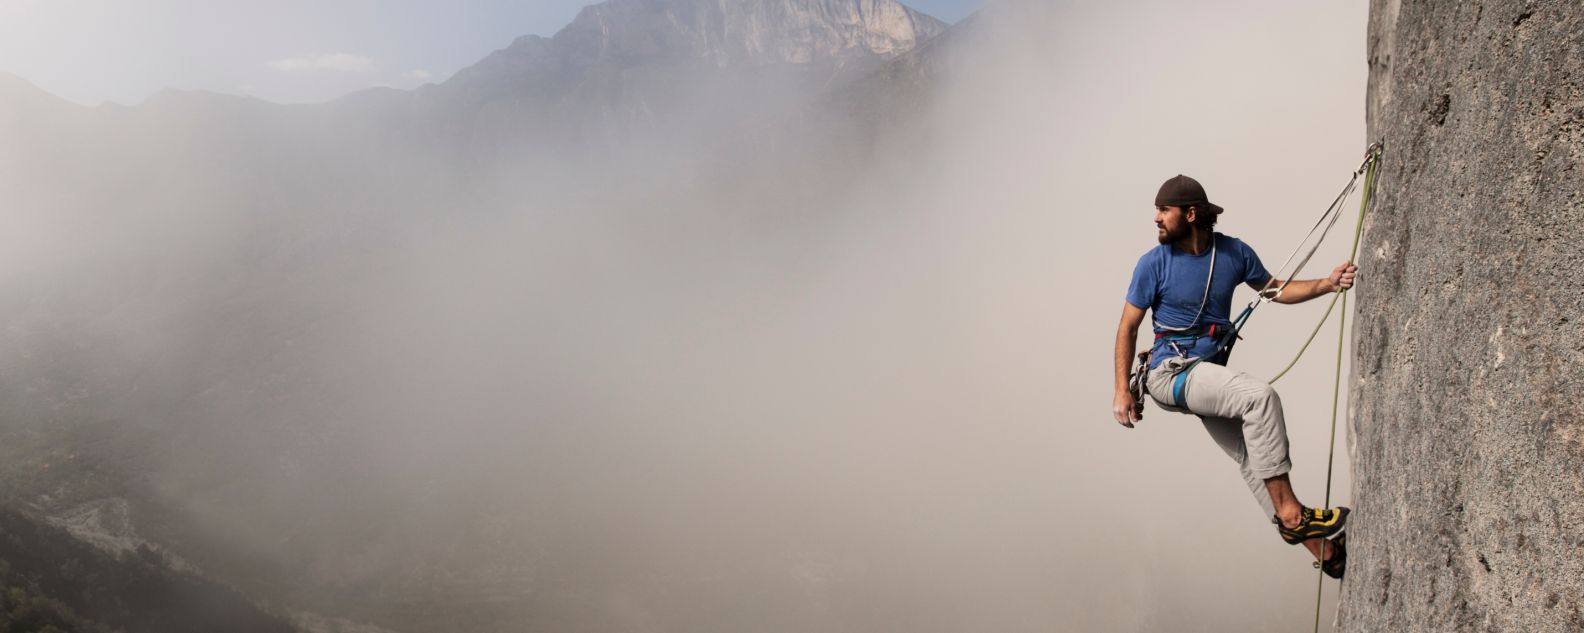 Mountain climber ascends a rock face among the clouds